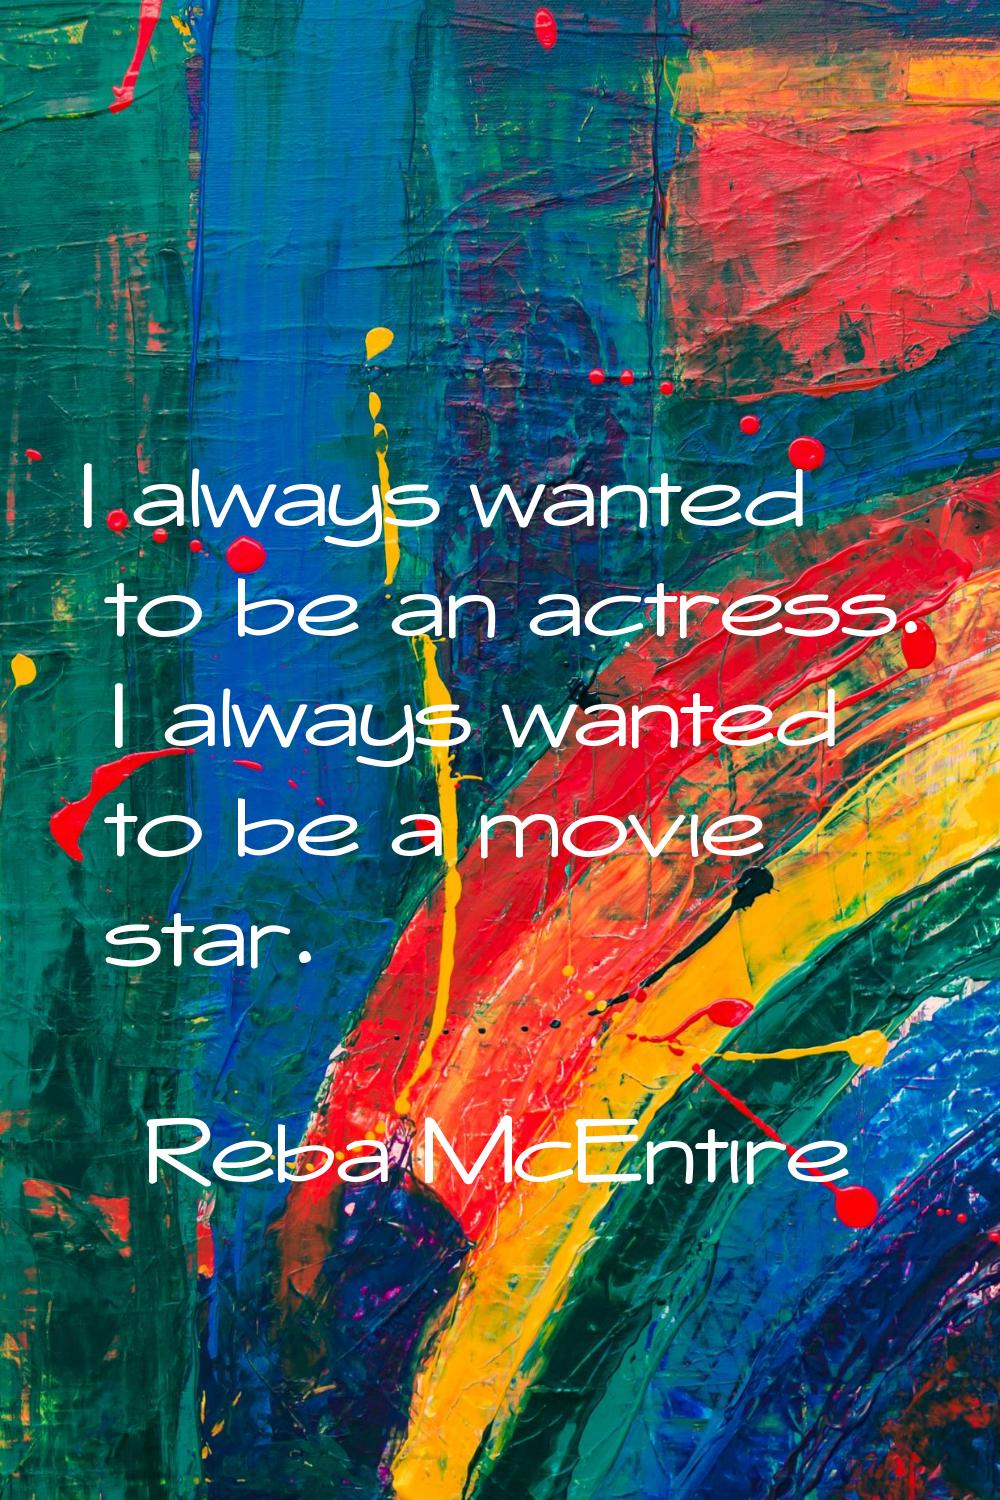 I always wanted to be an actress. I always wanted to be a movie star.